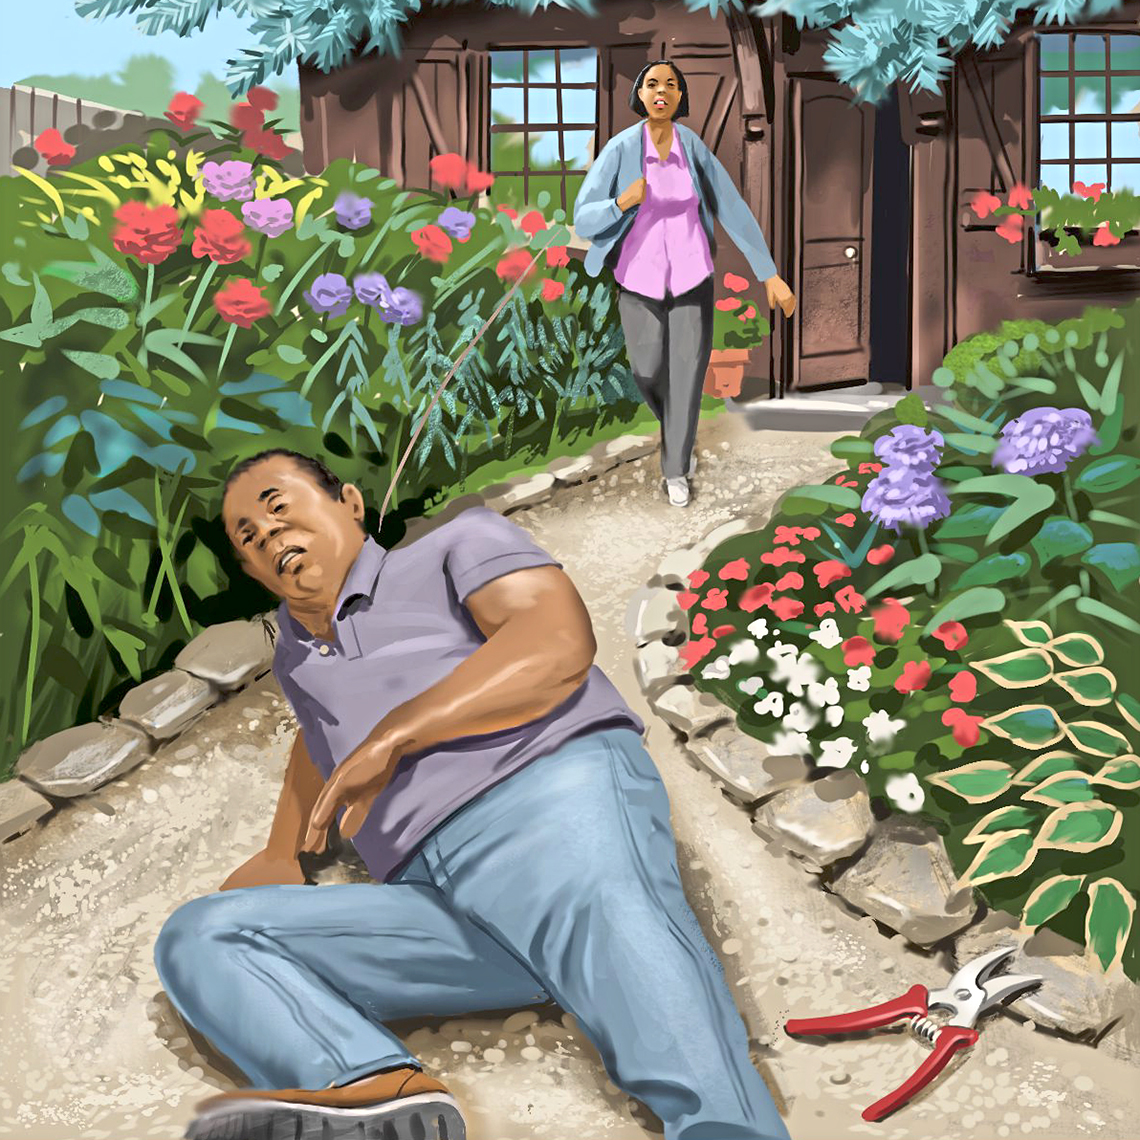 lllustration of a man who has fallen down on the walkway leading up to his home and his wife running out to assist